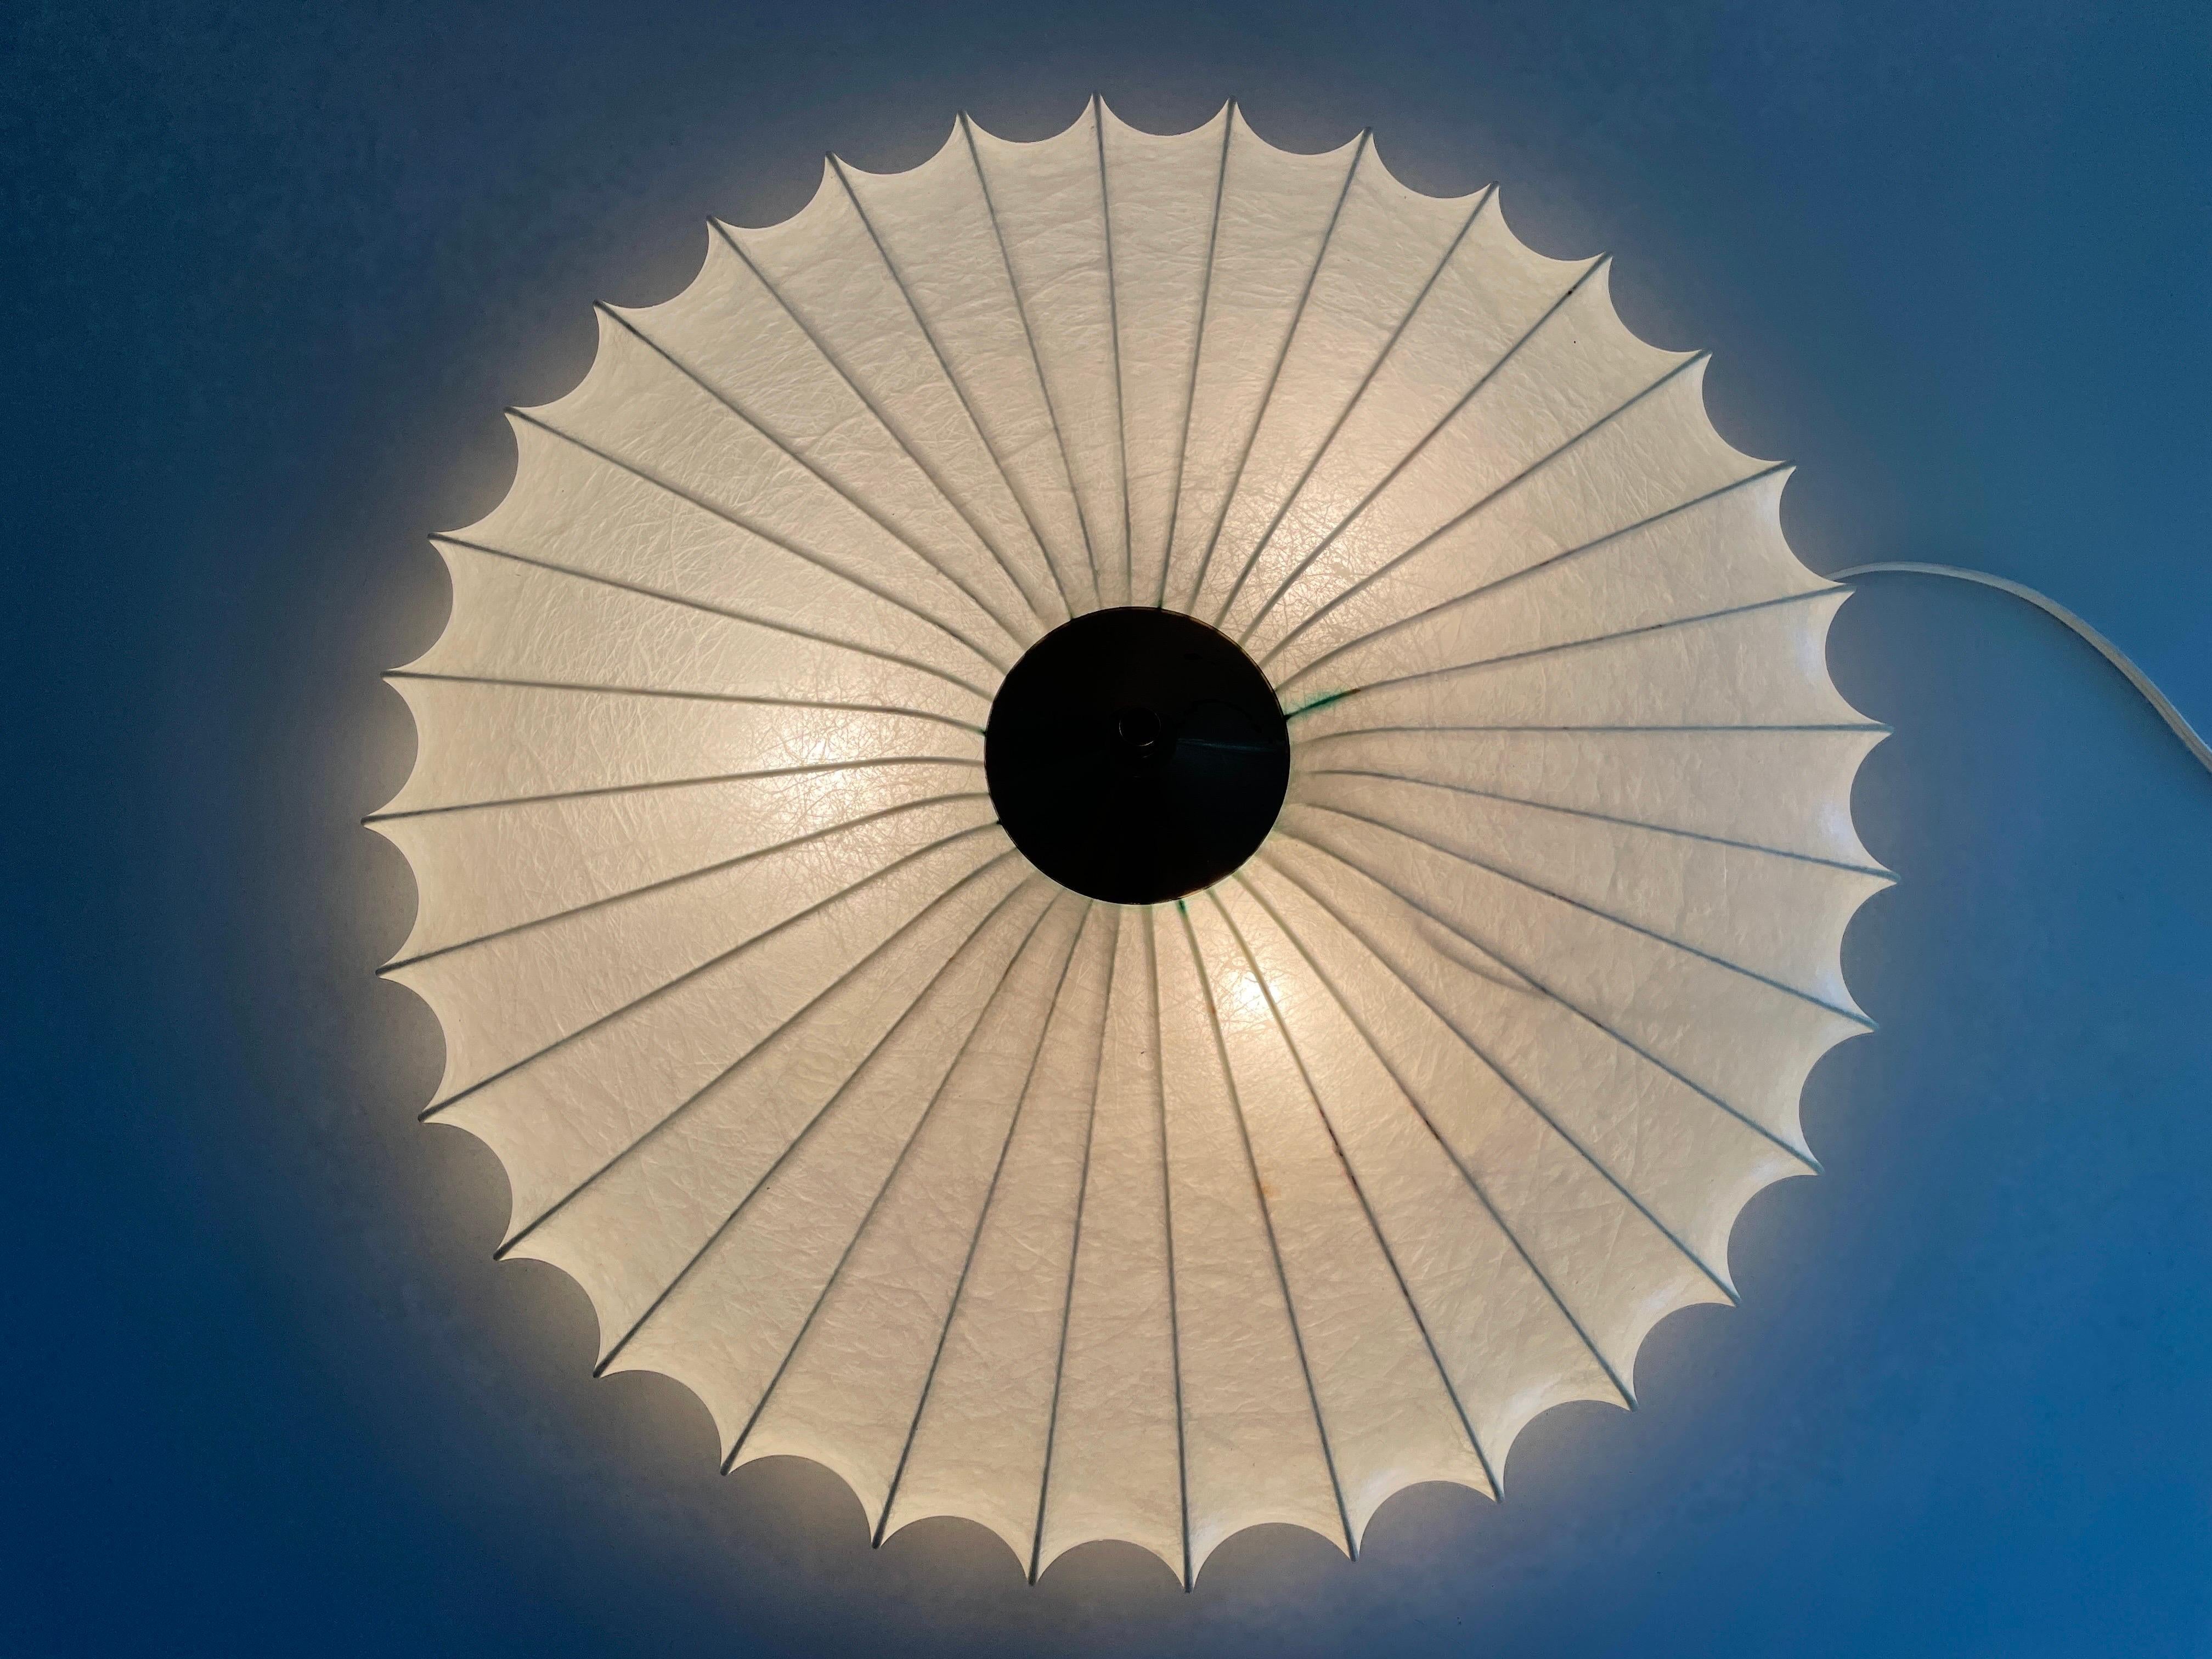 Cocoon Large Flush Mount Ceiling Lamp by Goldkant, 1960s, Germany For Sale 6